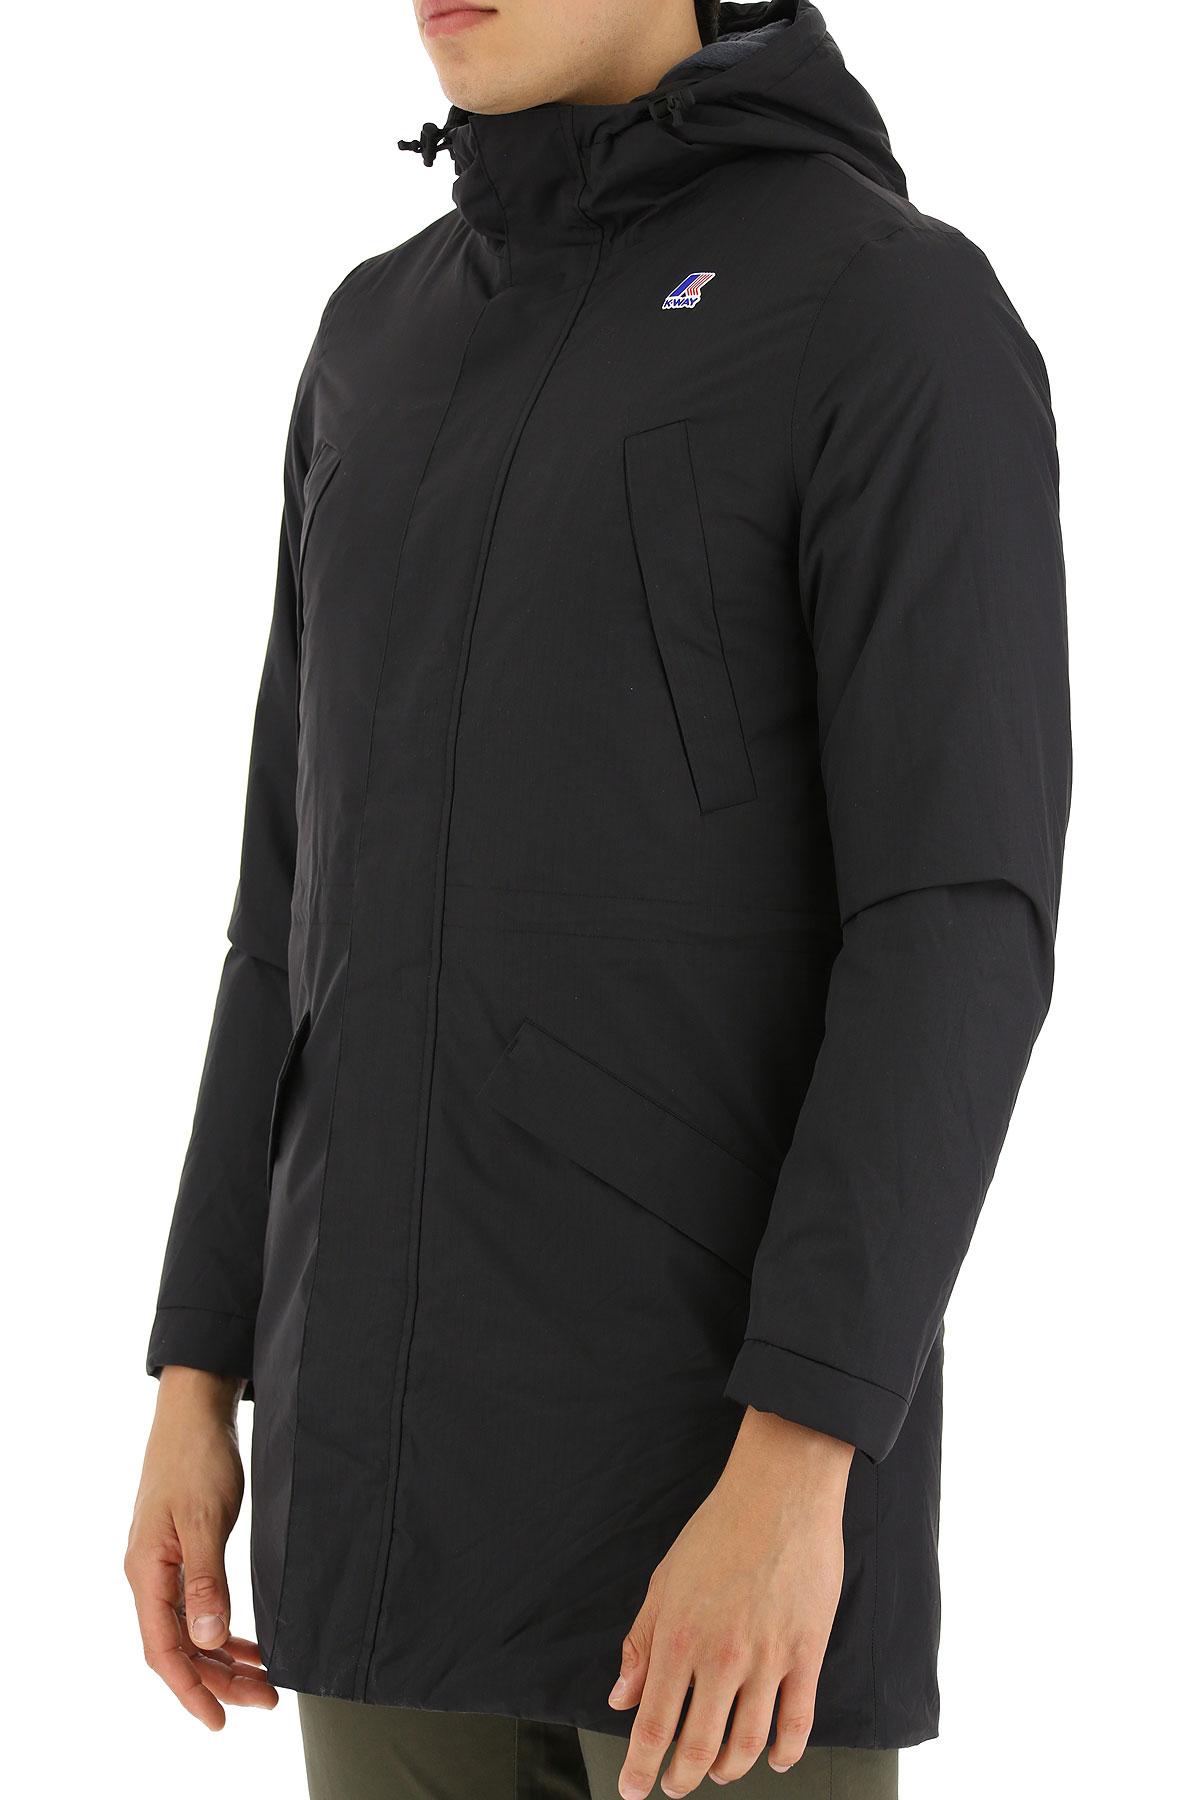 K-Way Synthetic Clothing For Men in Black for Men - Lyst